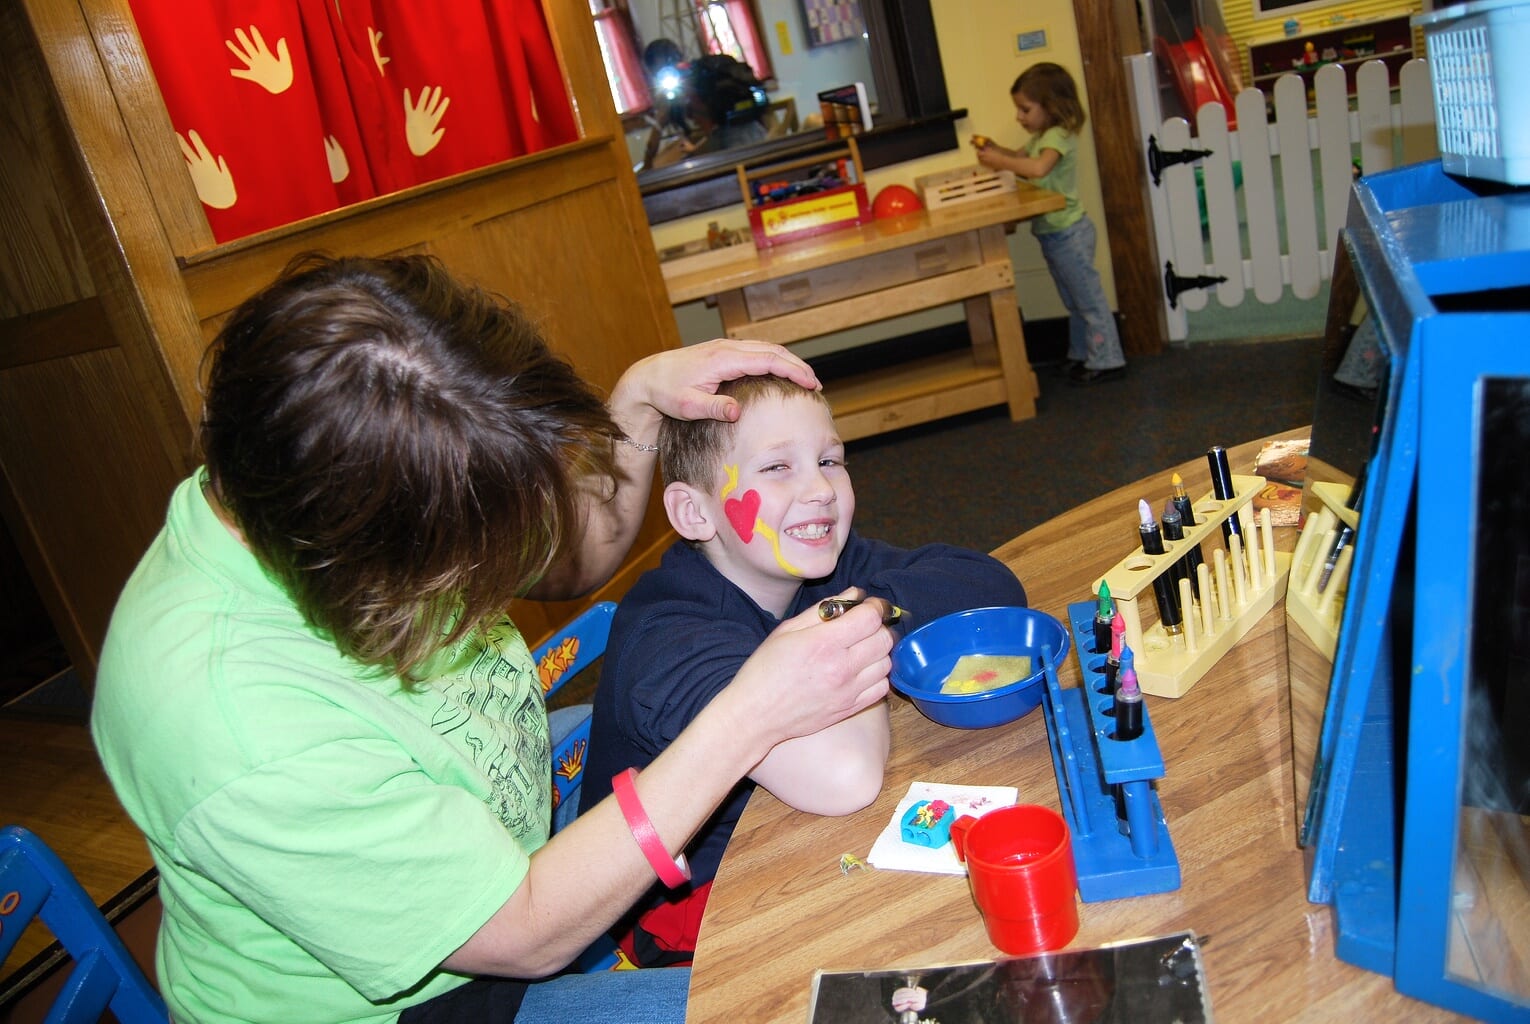 Face painting exhibit: Fun things to do in Southwest Michigan at the Curious Kids' Museum & Discovery Zone